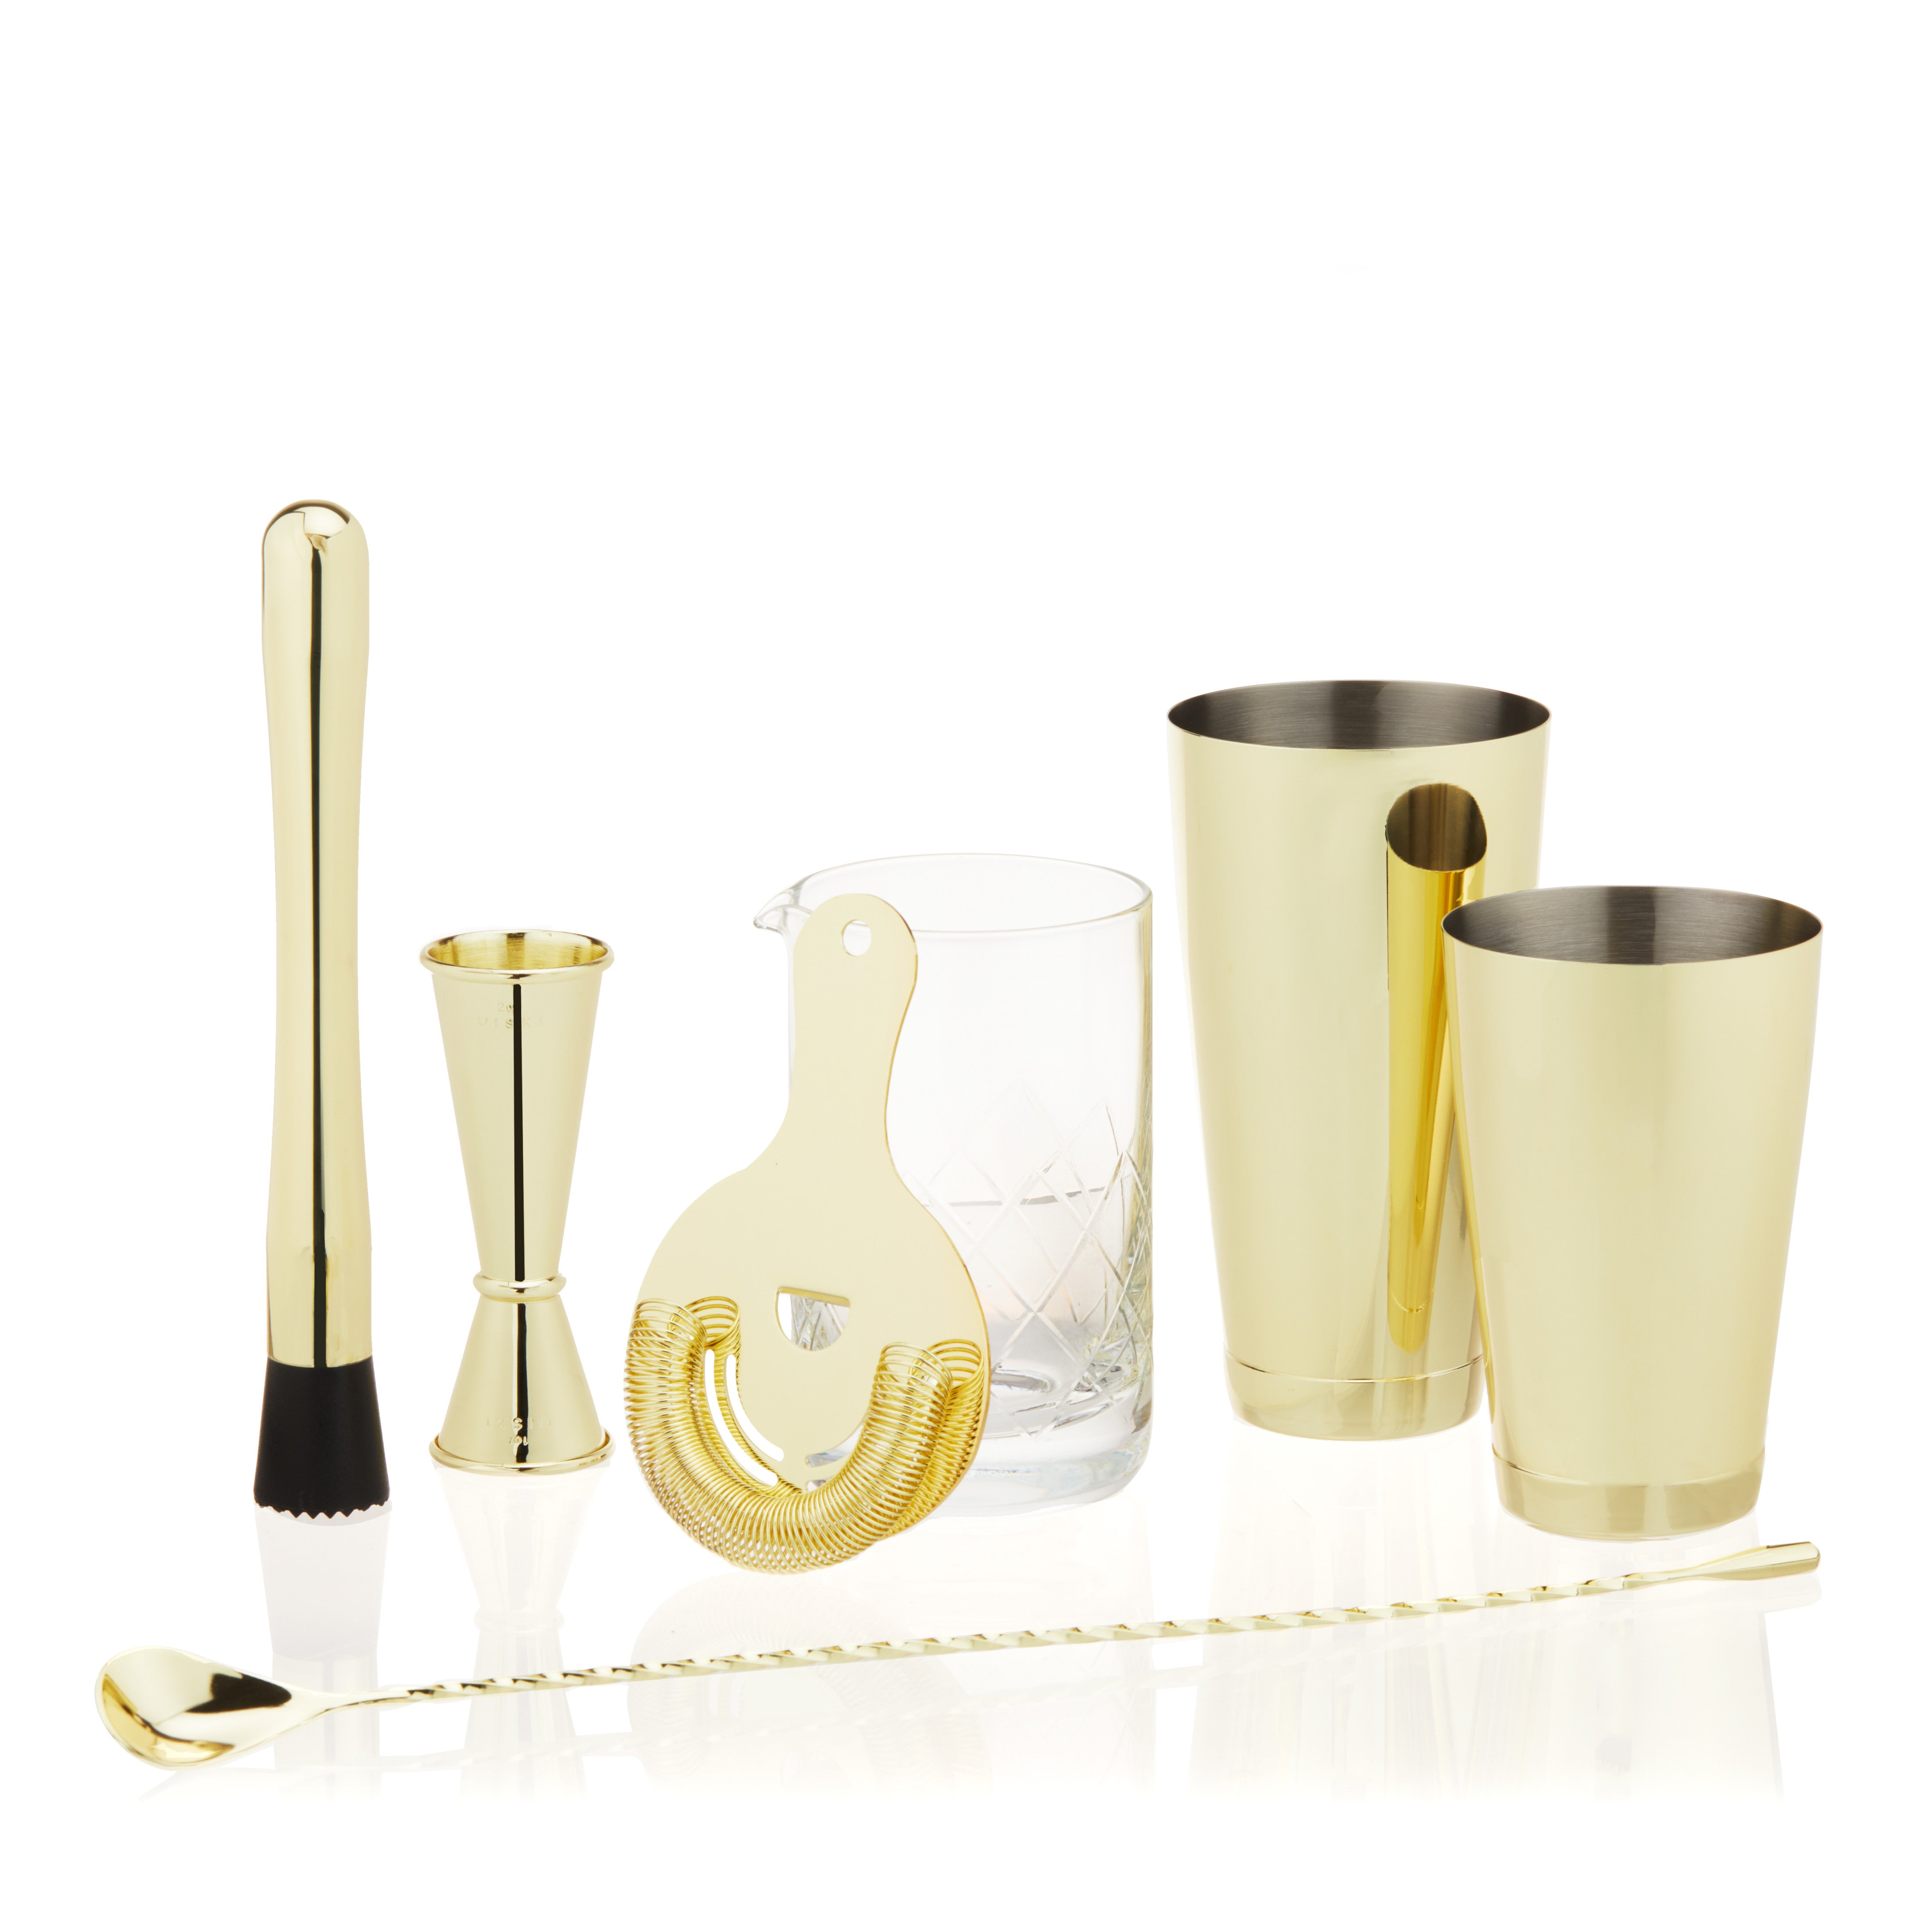 Viski Gold Set - Gold Bar Set for Cocktails - Mixing Glass, Barspoon and Bartender Accessories - Stainless Steel Set of